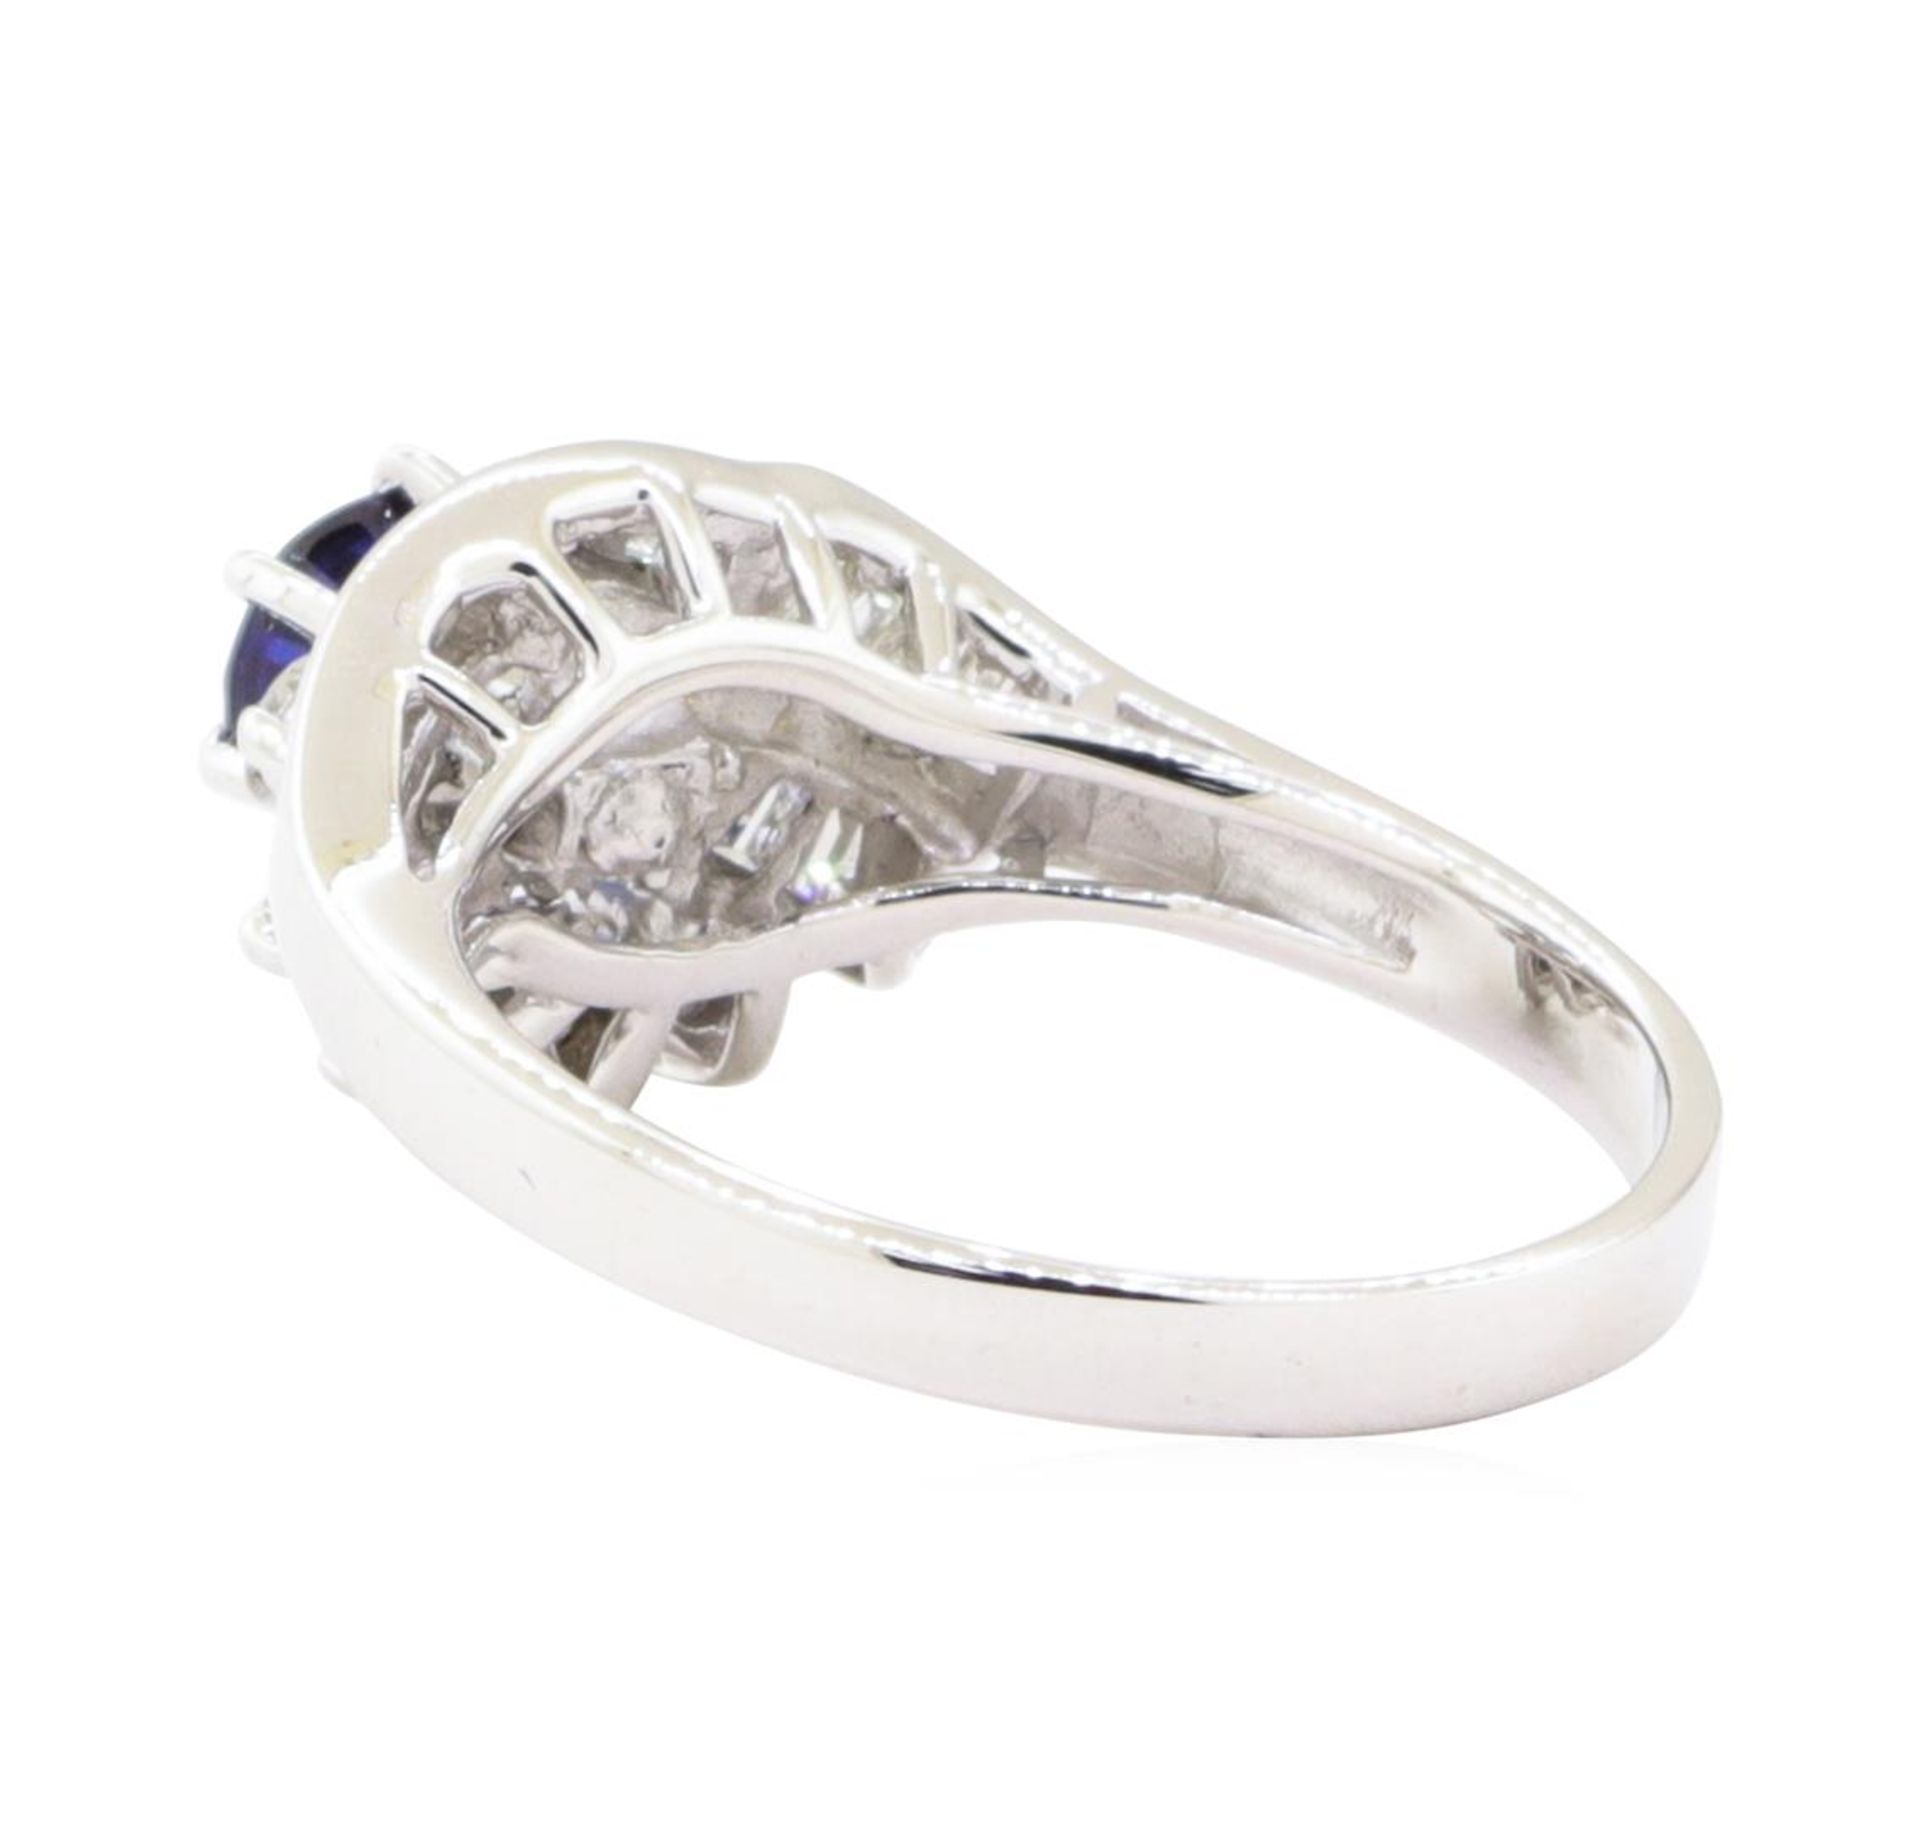 1.13 ctw Sapphire and Diamond Ring - 14KT White Gold - Image 3 of 4